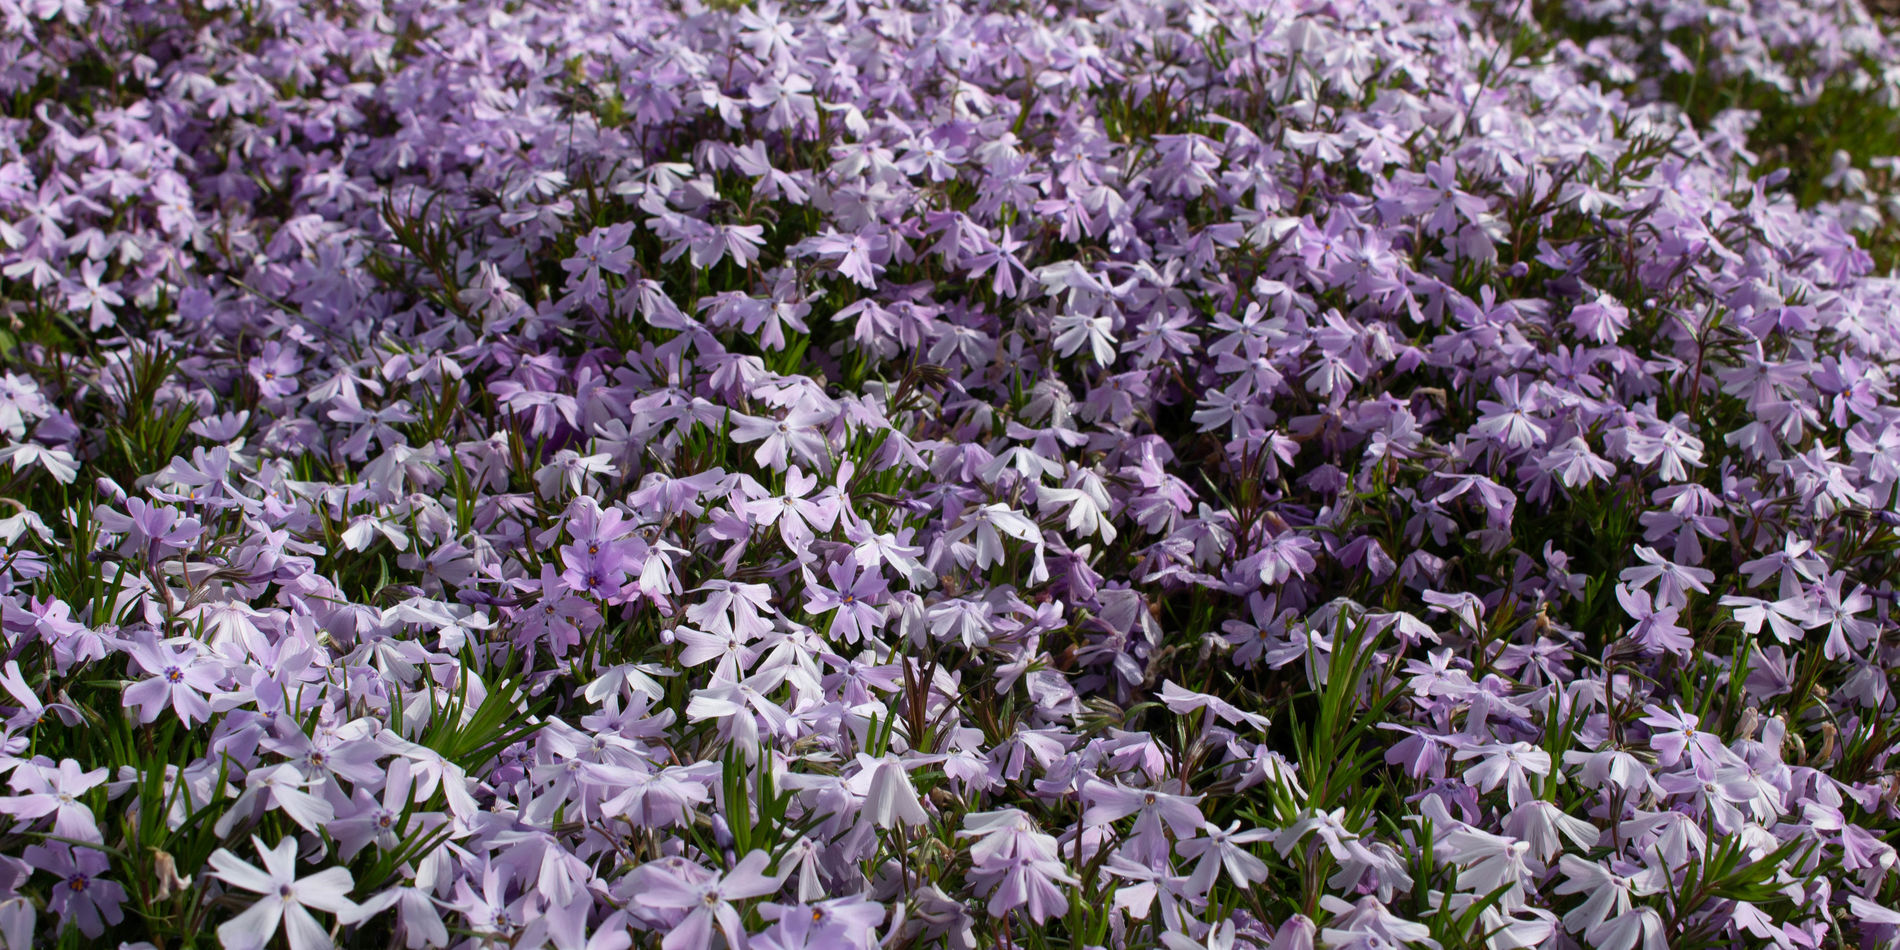 Ground Cover with purple flowers